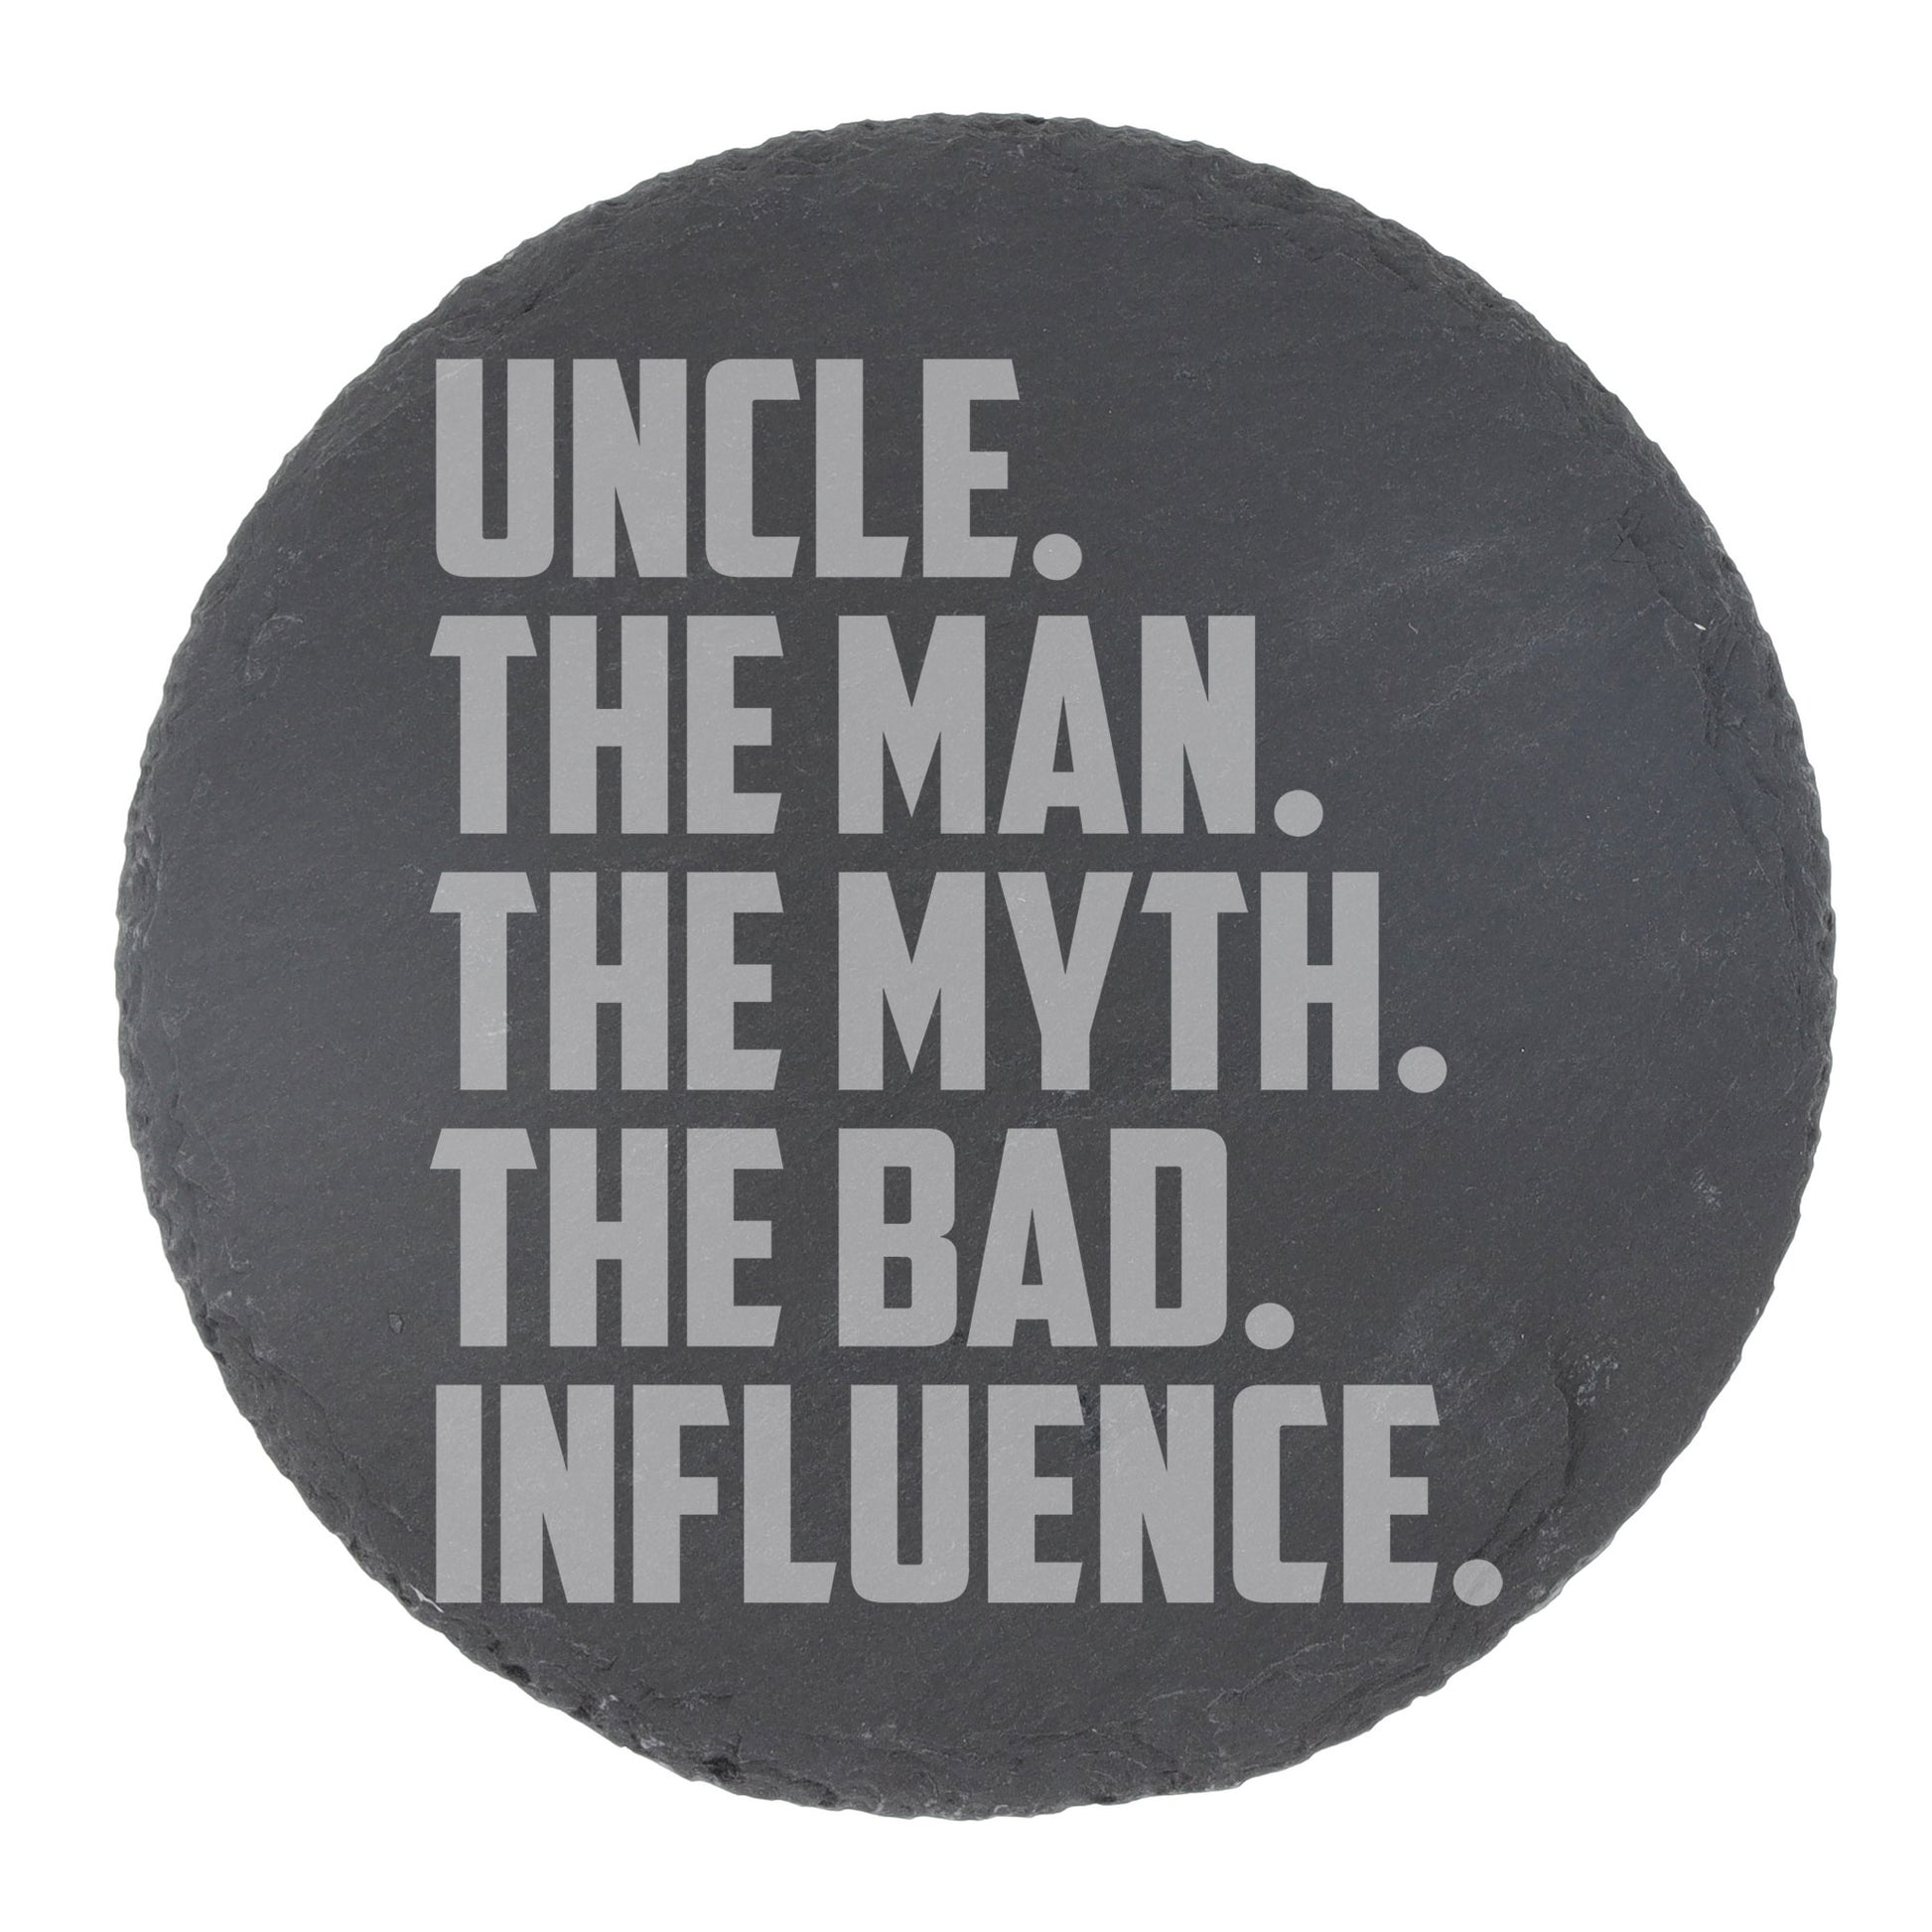 Uncle, The Man, The Myth, The Bad Influence Engraved Beer Glass and/or Coaster Set  - Always Looking Good - Round Coaster Only  